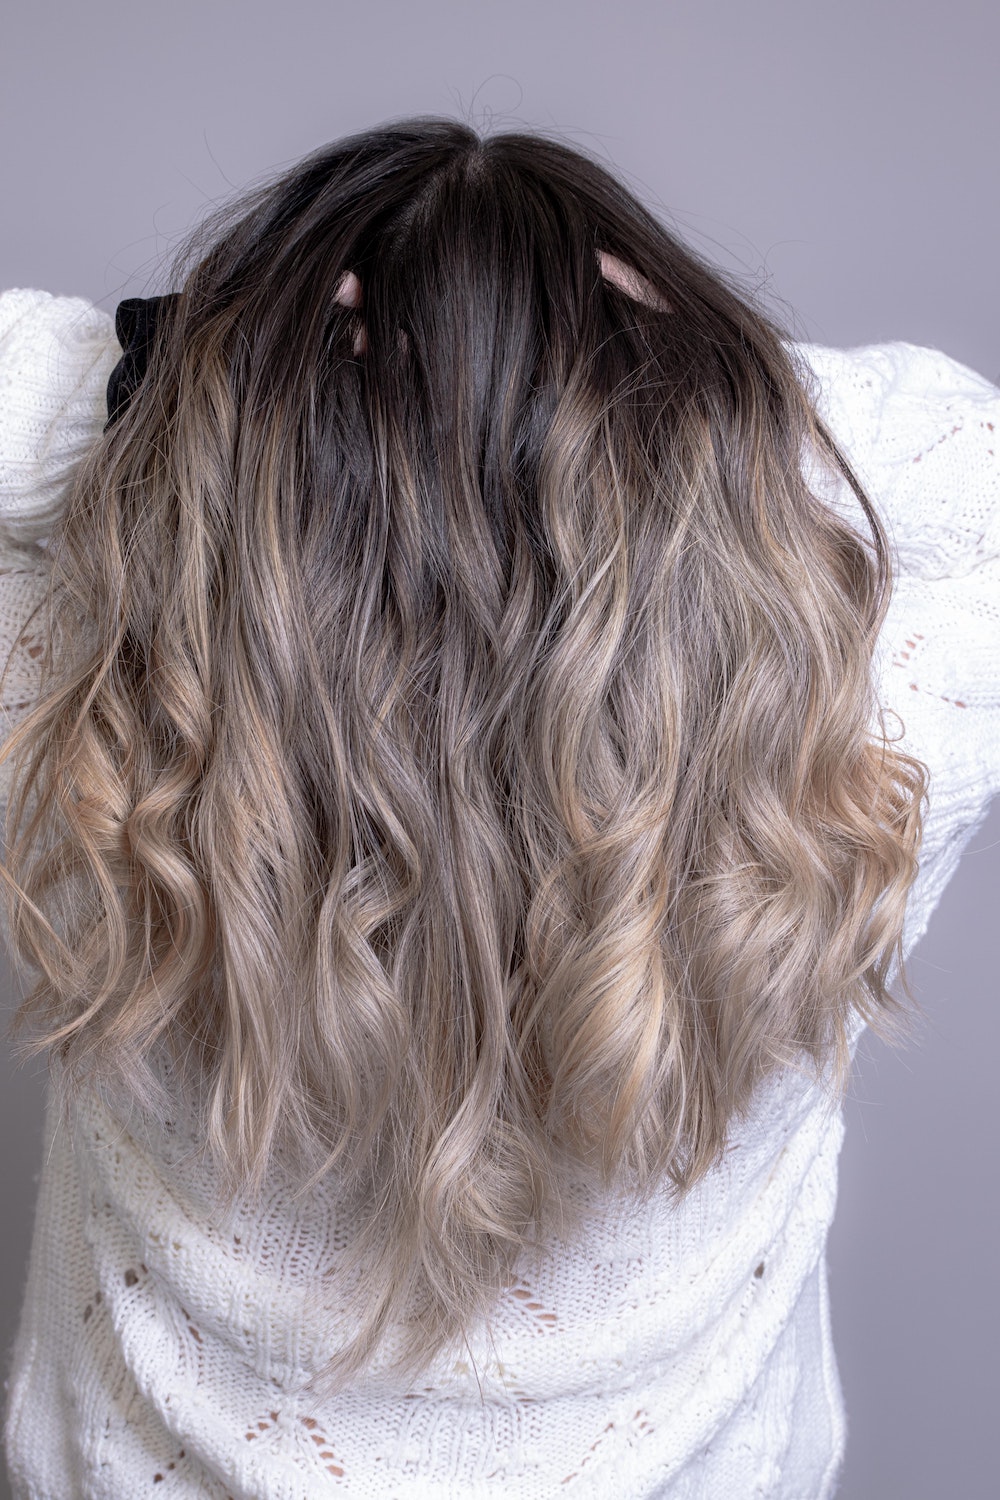 Soft Ombre - gradual fade from darker roots to lighter ends.